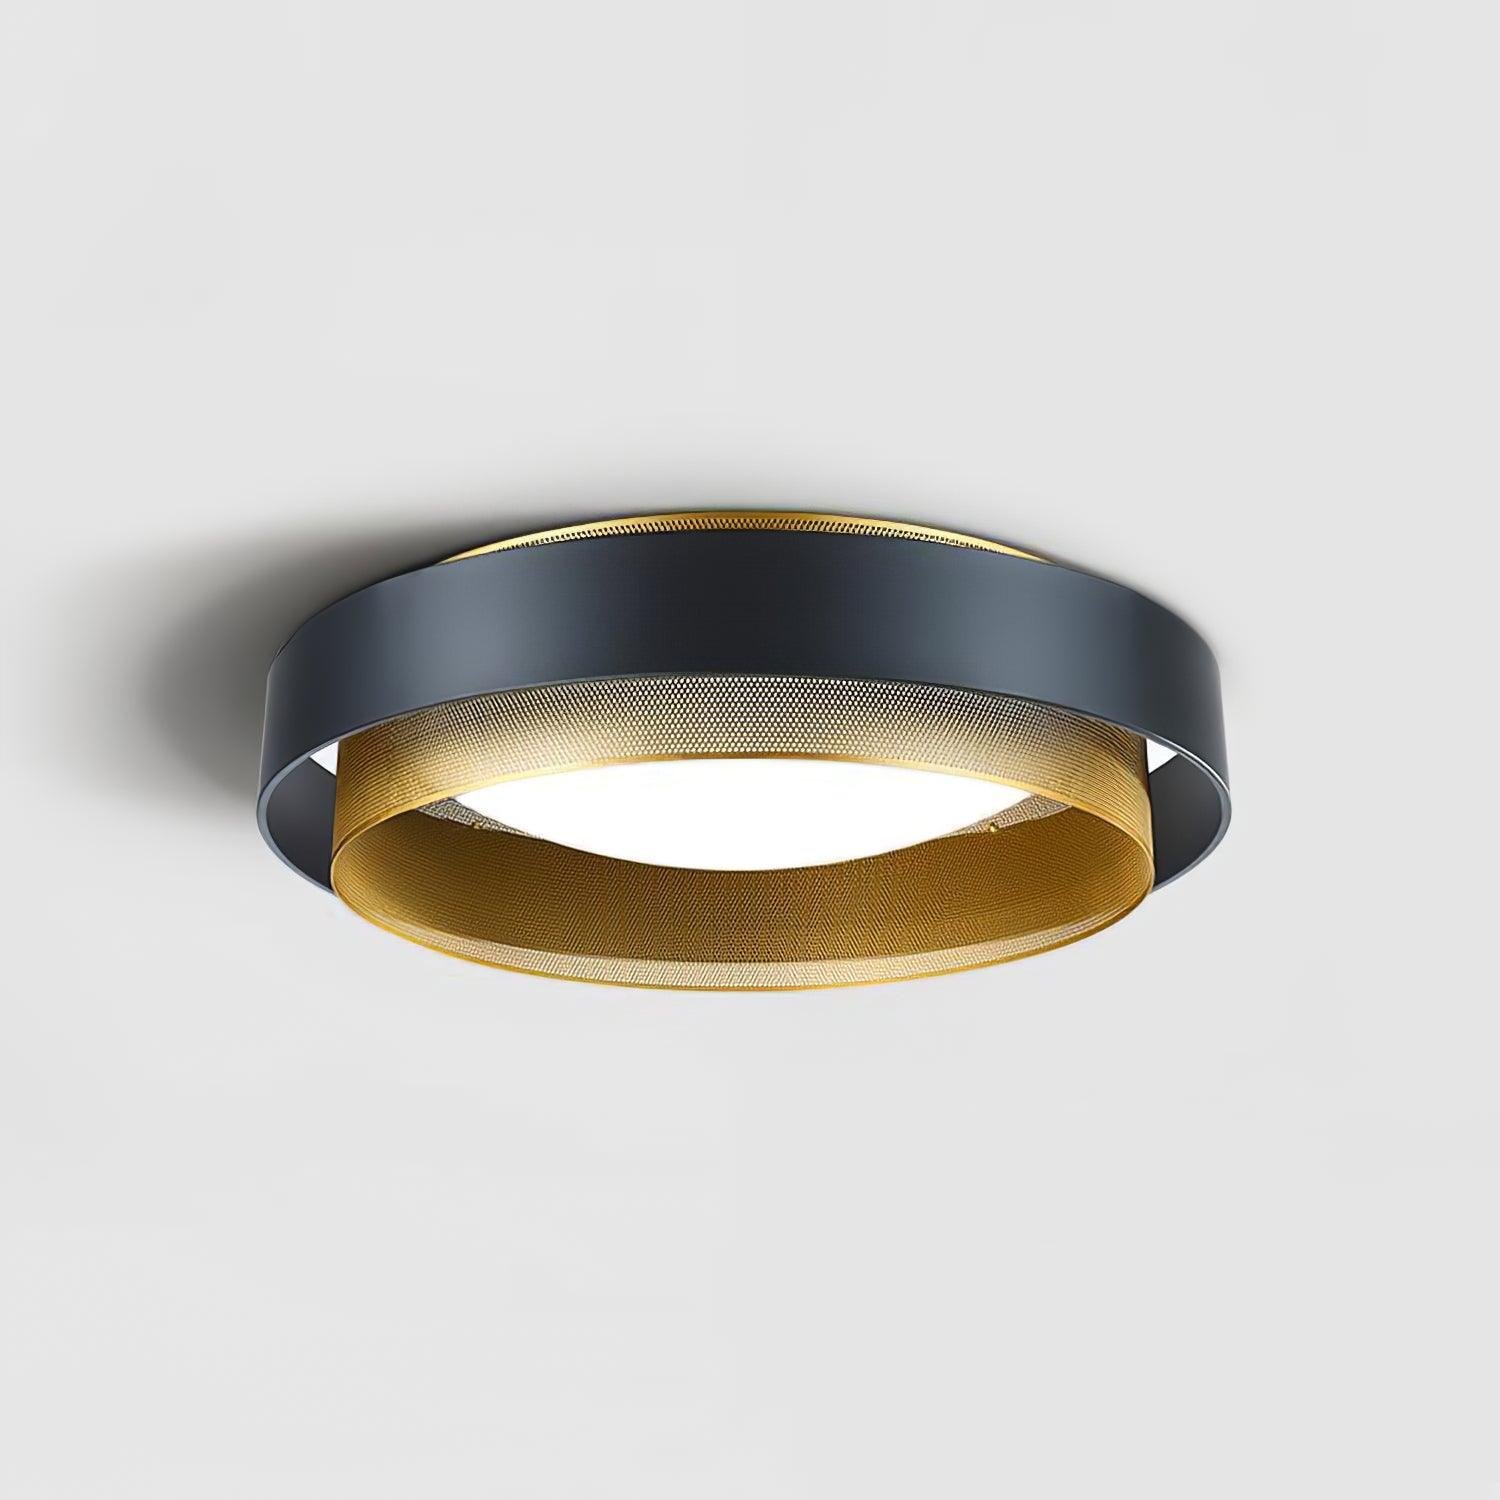 Nolan Ceiling Light in Gold and Black with Three-Color Changing Light, Diameter 18.1" x Height 5.9" (46cm x 15cm)